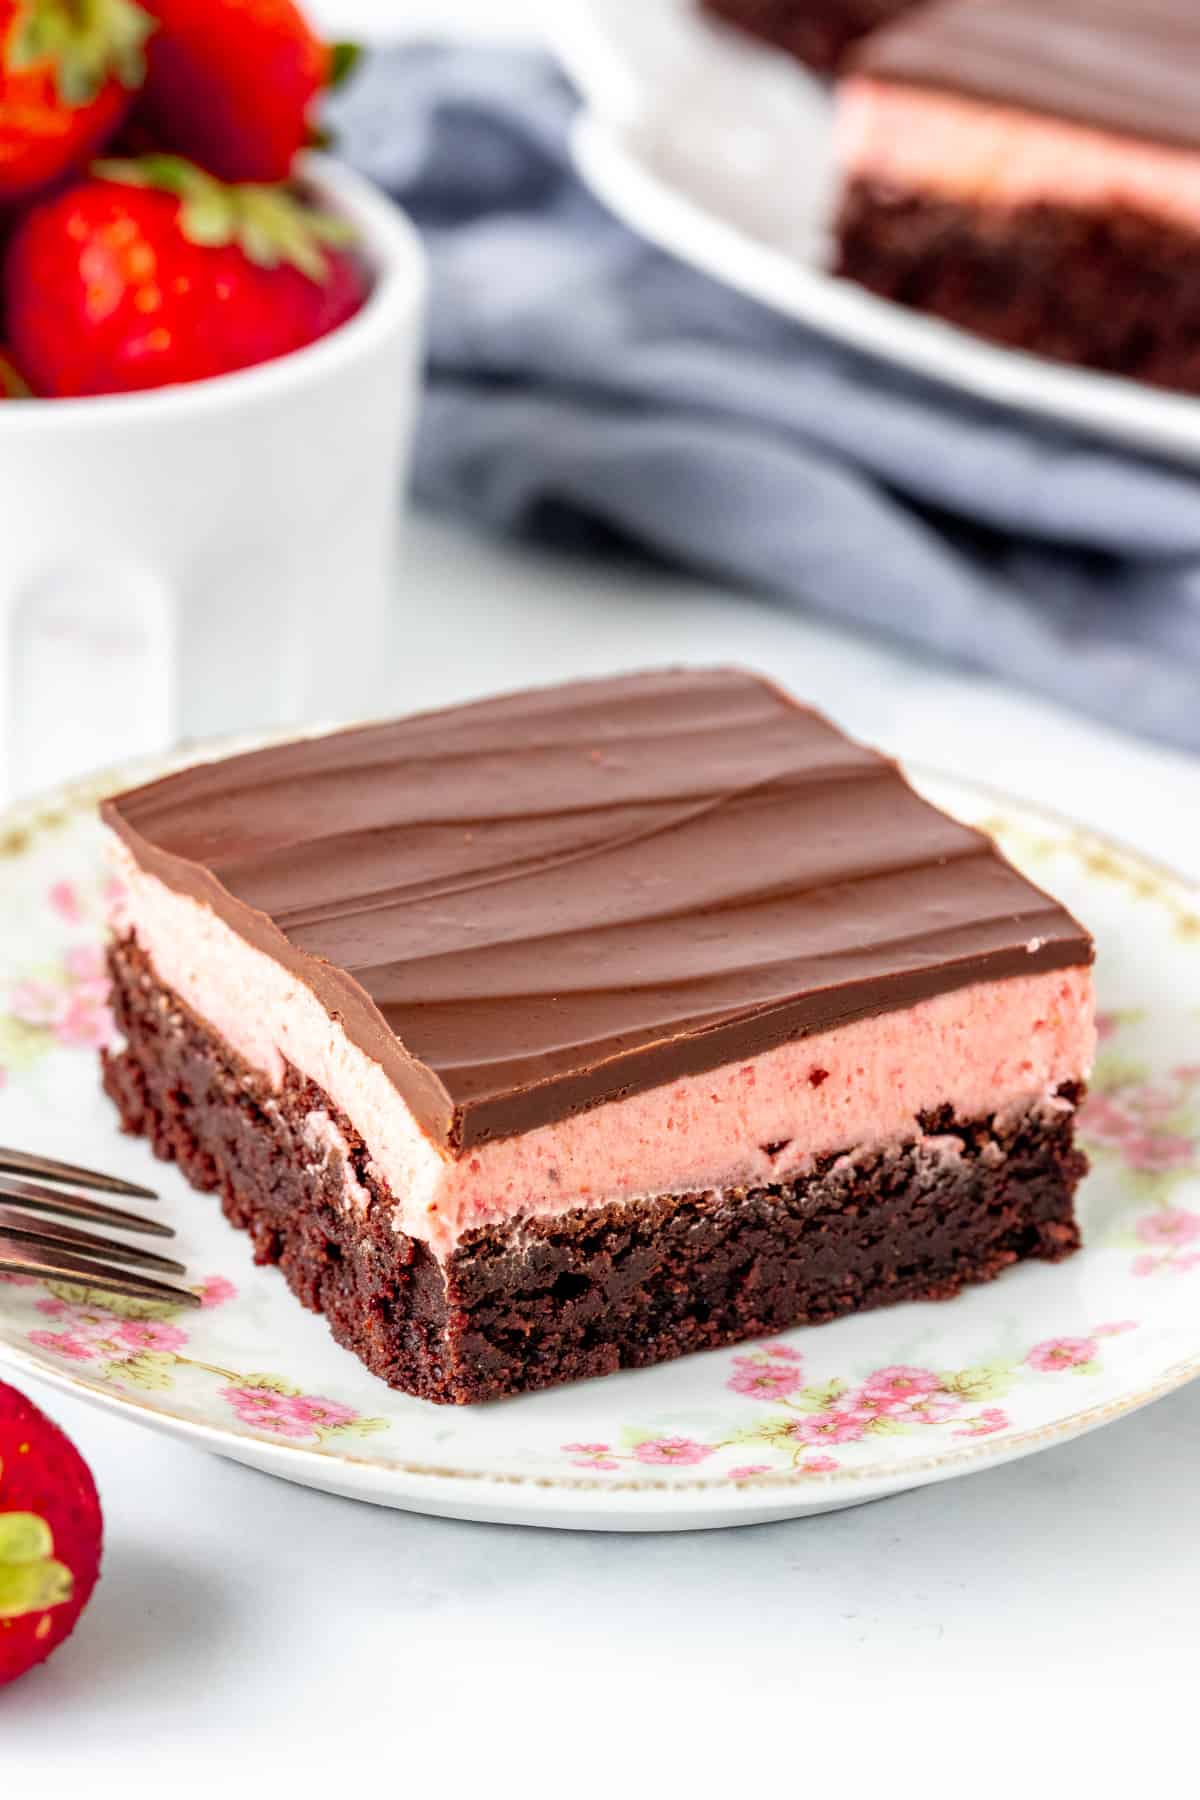 Strawberry brownie with a layer of strawberry frosting and chocolate on top